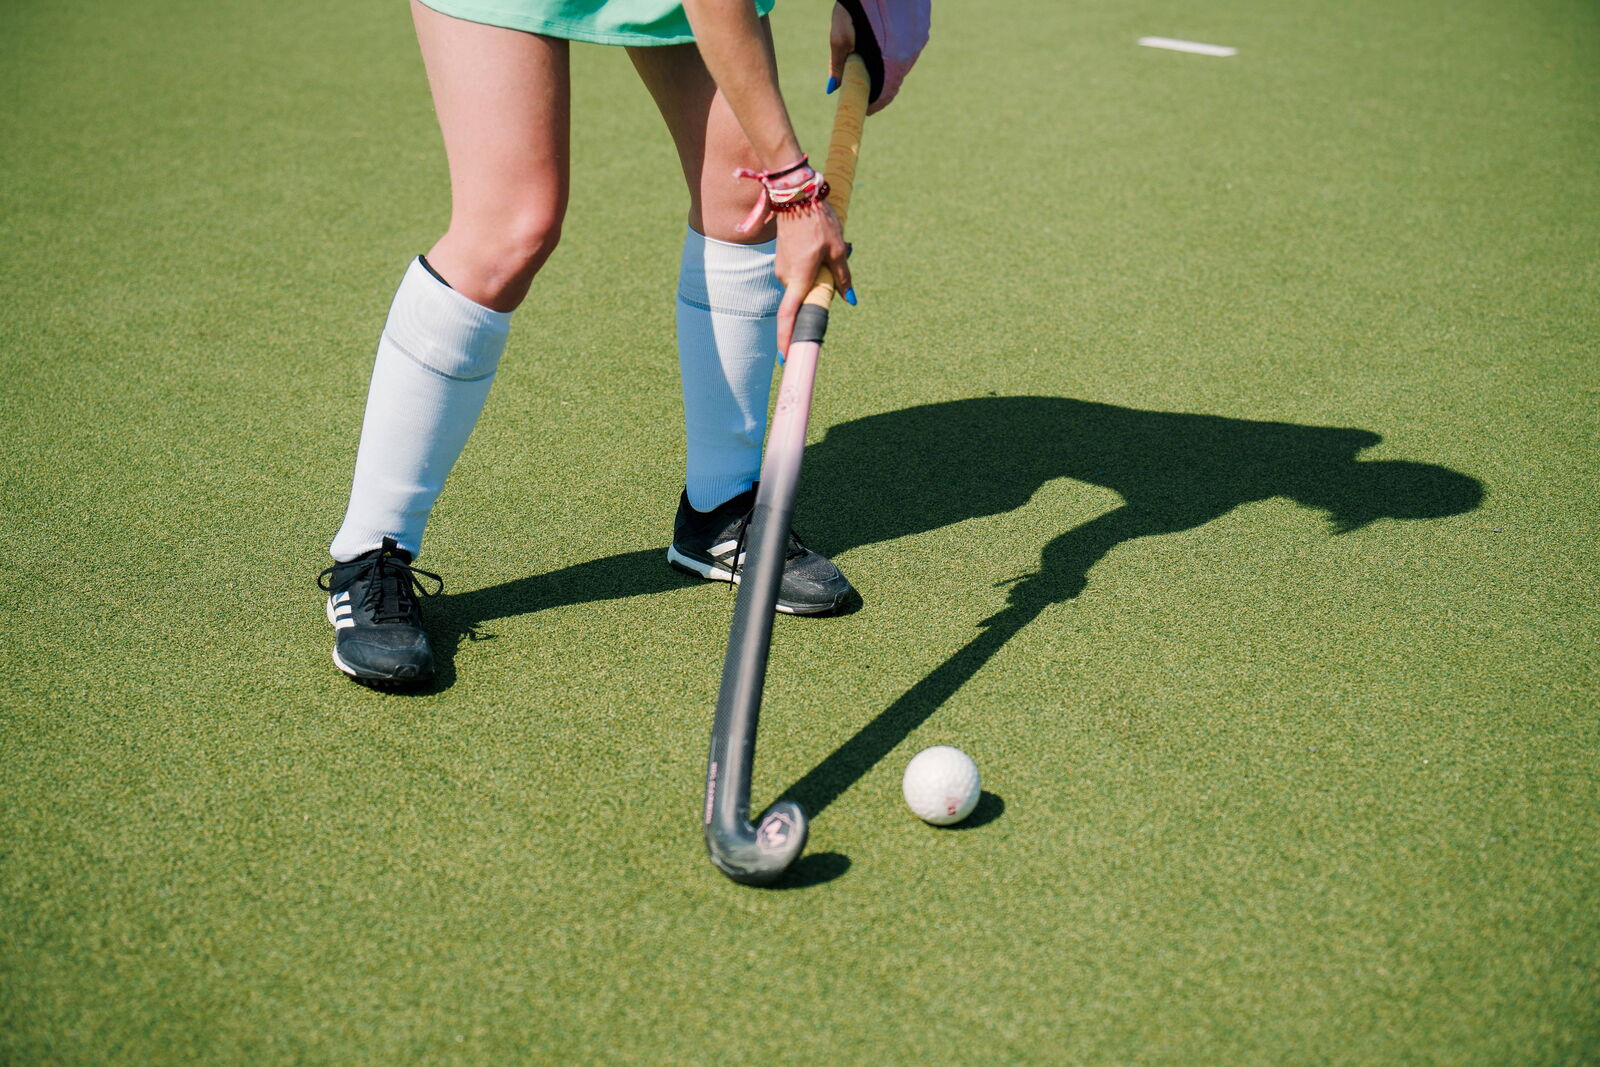 Hockey field with player and her shadow - Ball on green turf field - Act Sports, the Premium Artificial Sports Turf Supplier